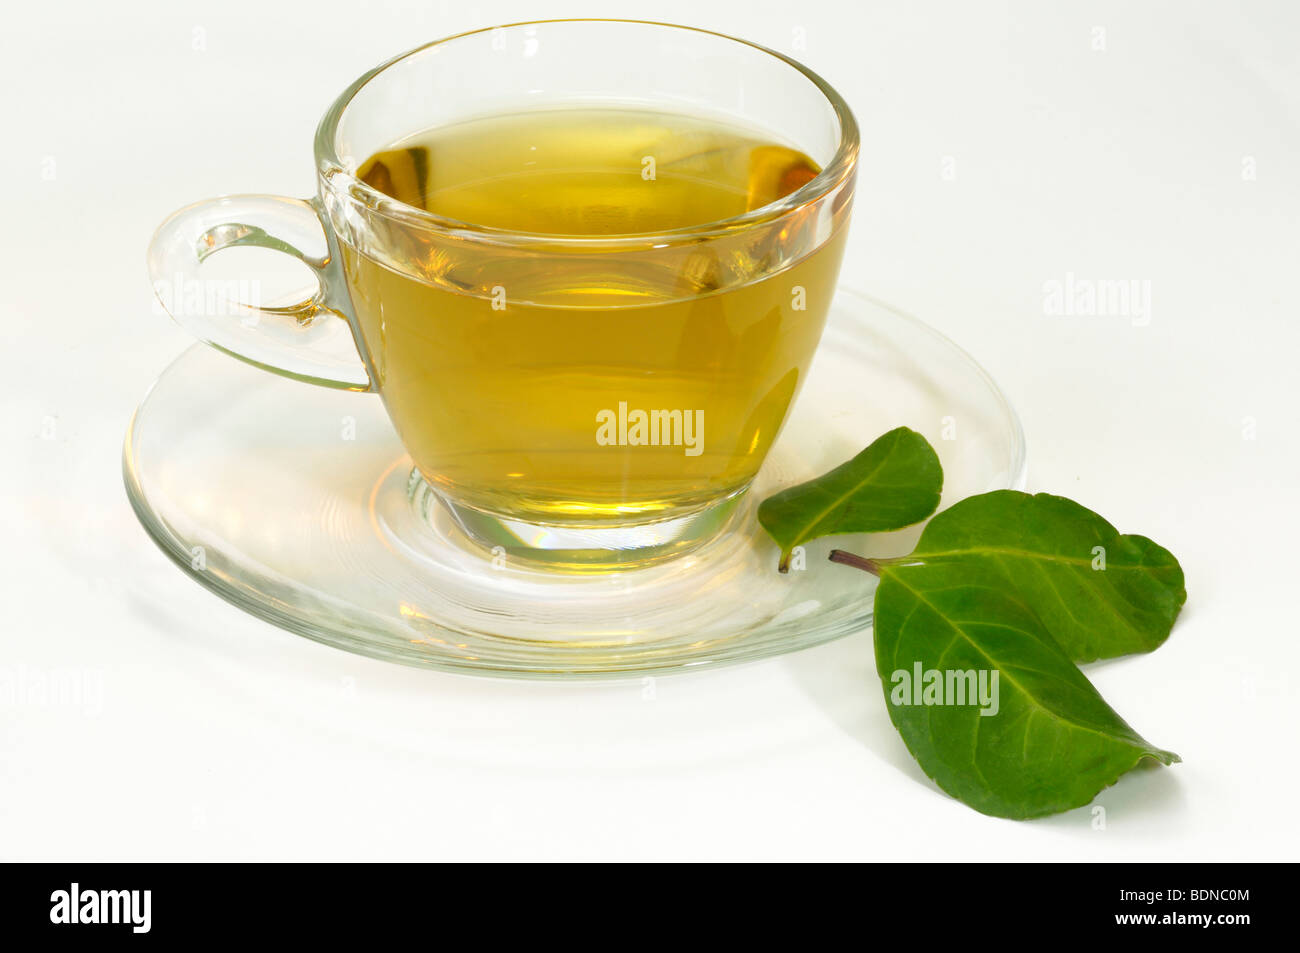 Mate, Paraguay Tea (Ilex paraguariensis). A cup of tea with three leaves, studio picture. Stock Photo